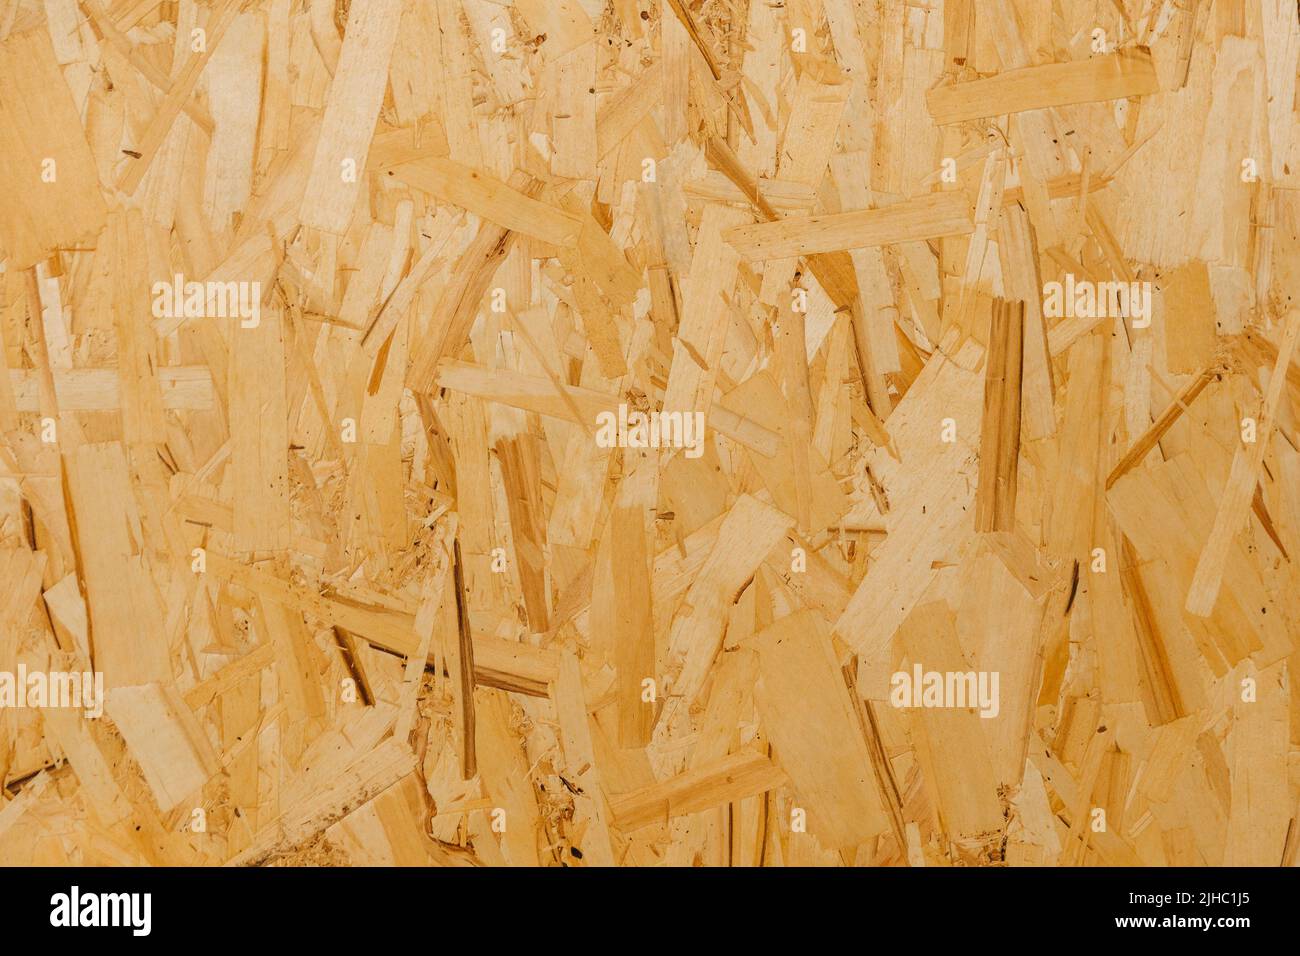 Close up pressed wooden panel background, texture of oriented strand board - OSB wood. Stock Photo